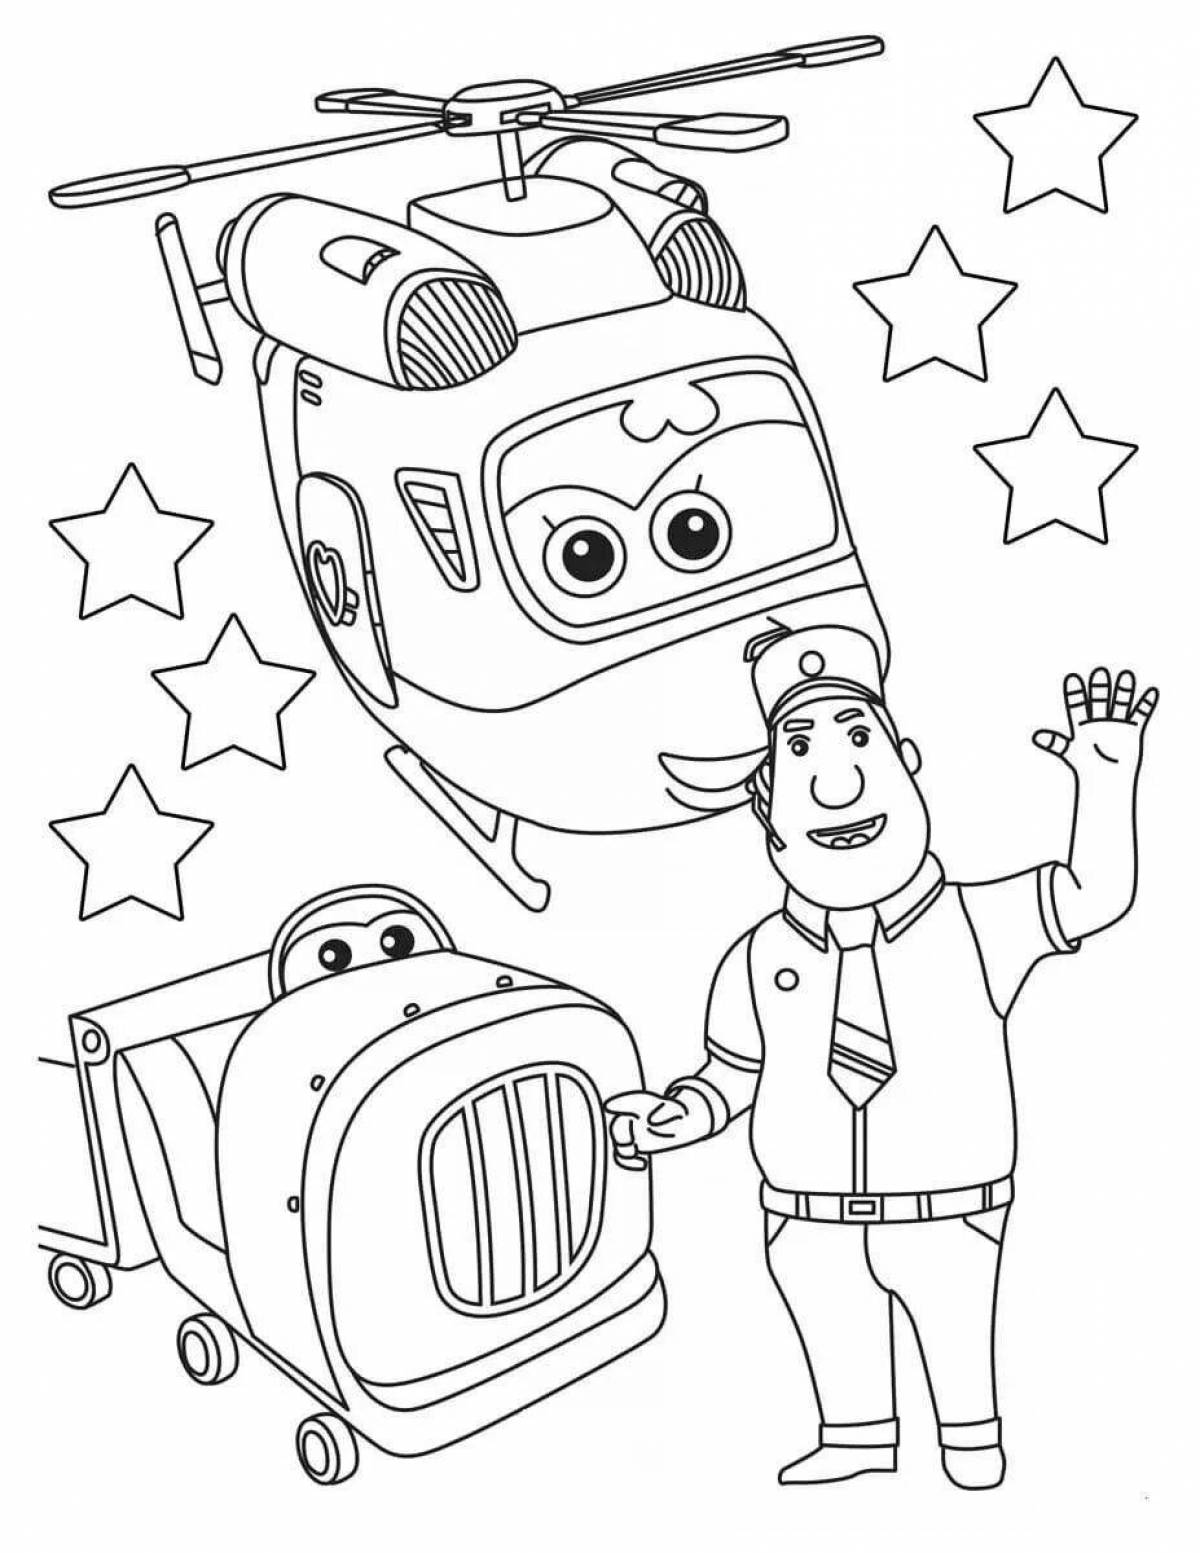 Exquisite jet coloring page